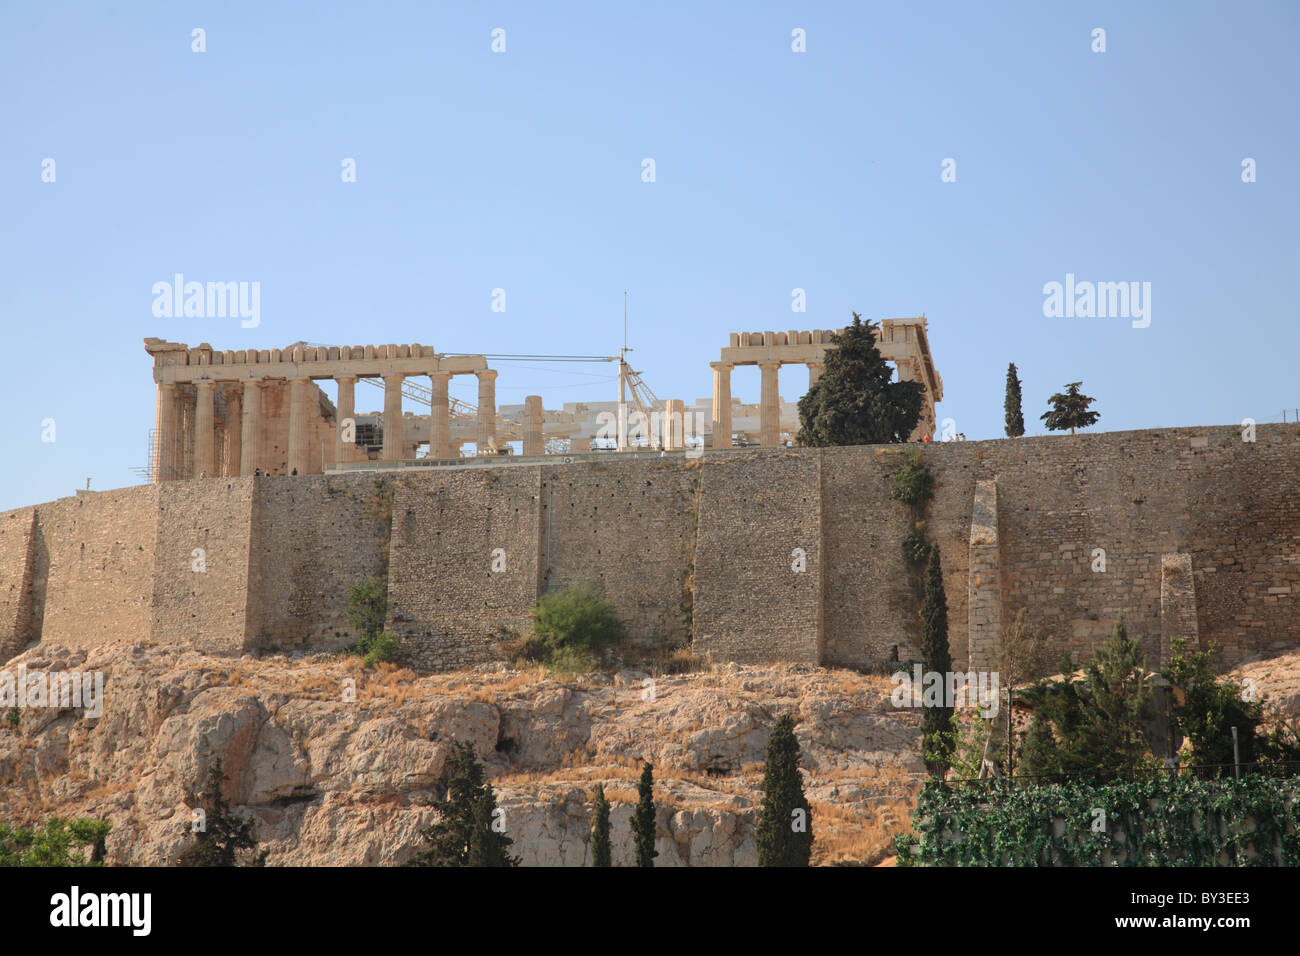 View of the Acropolis and Parthenon from the Acropolis Museum Café, Athens, Greece Stock Photo